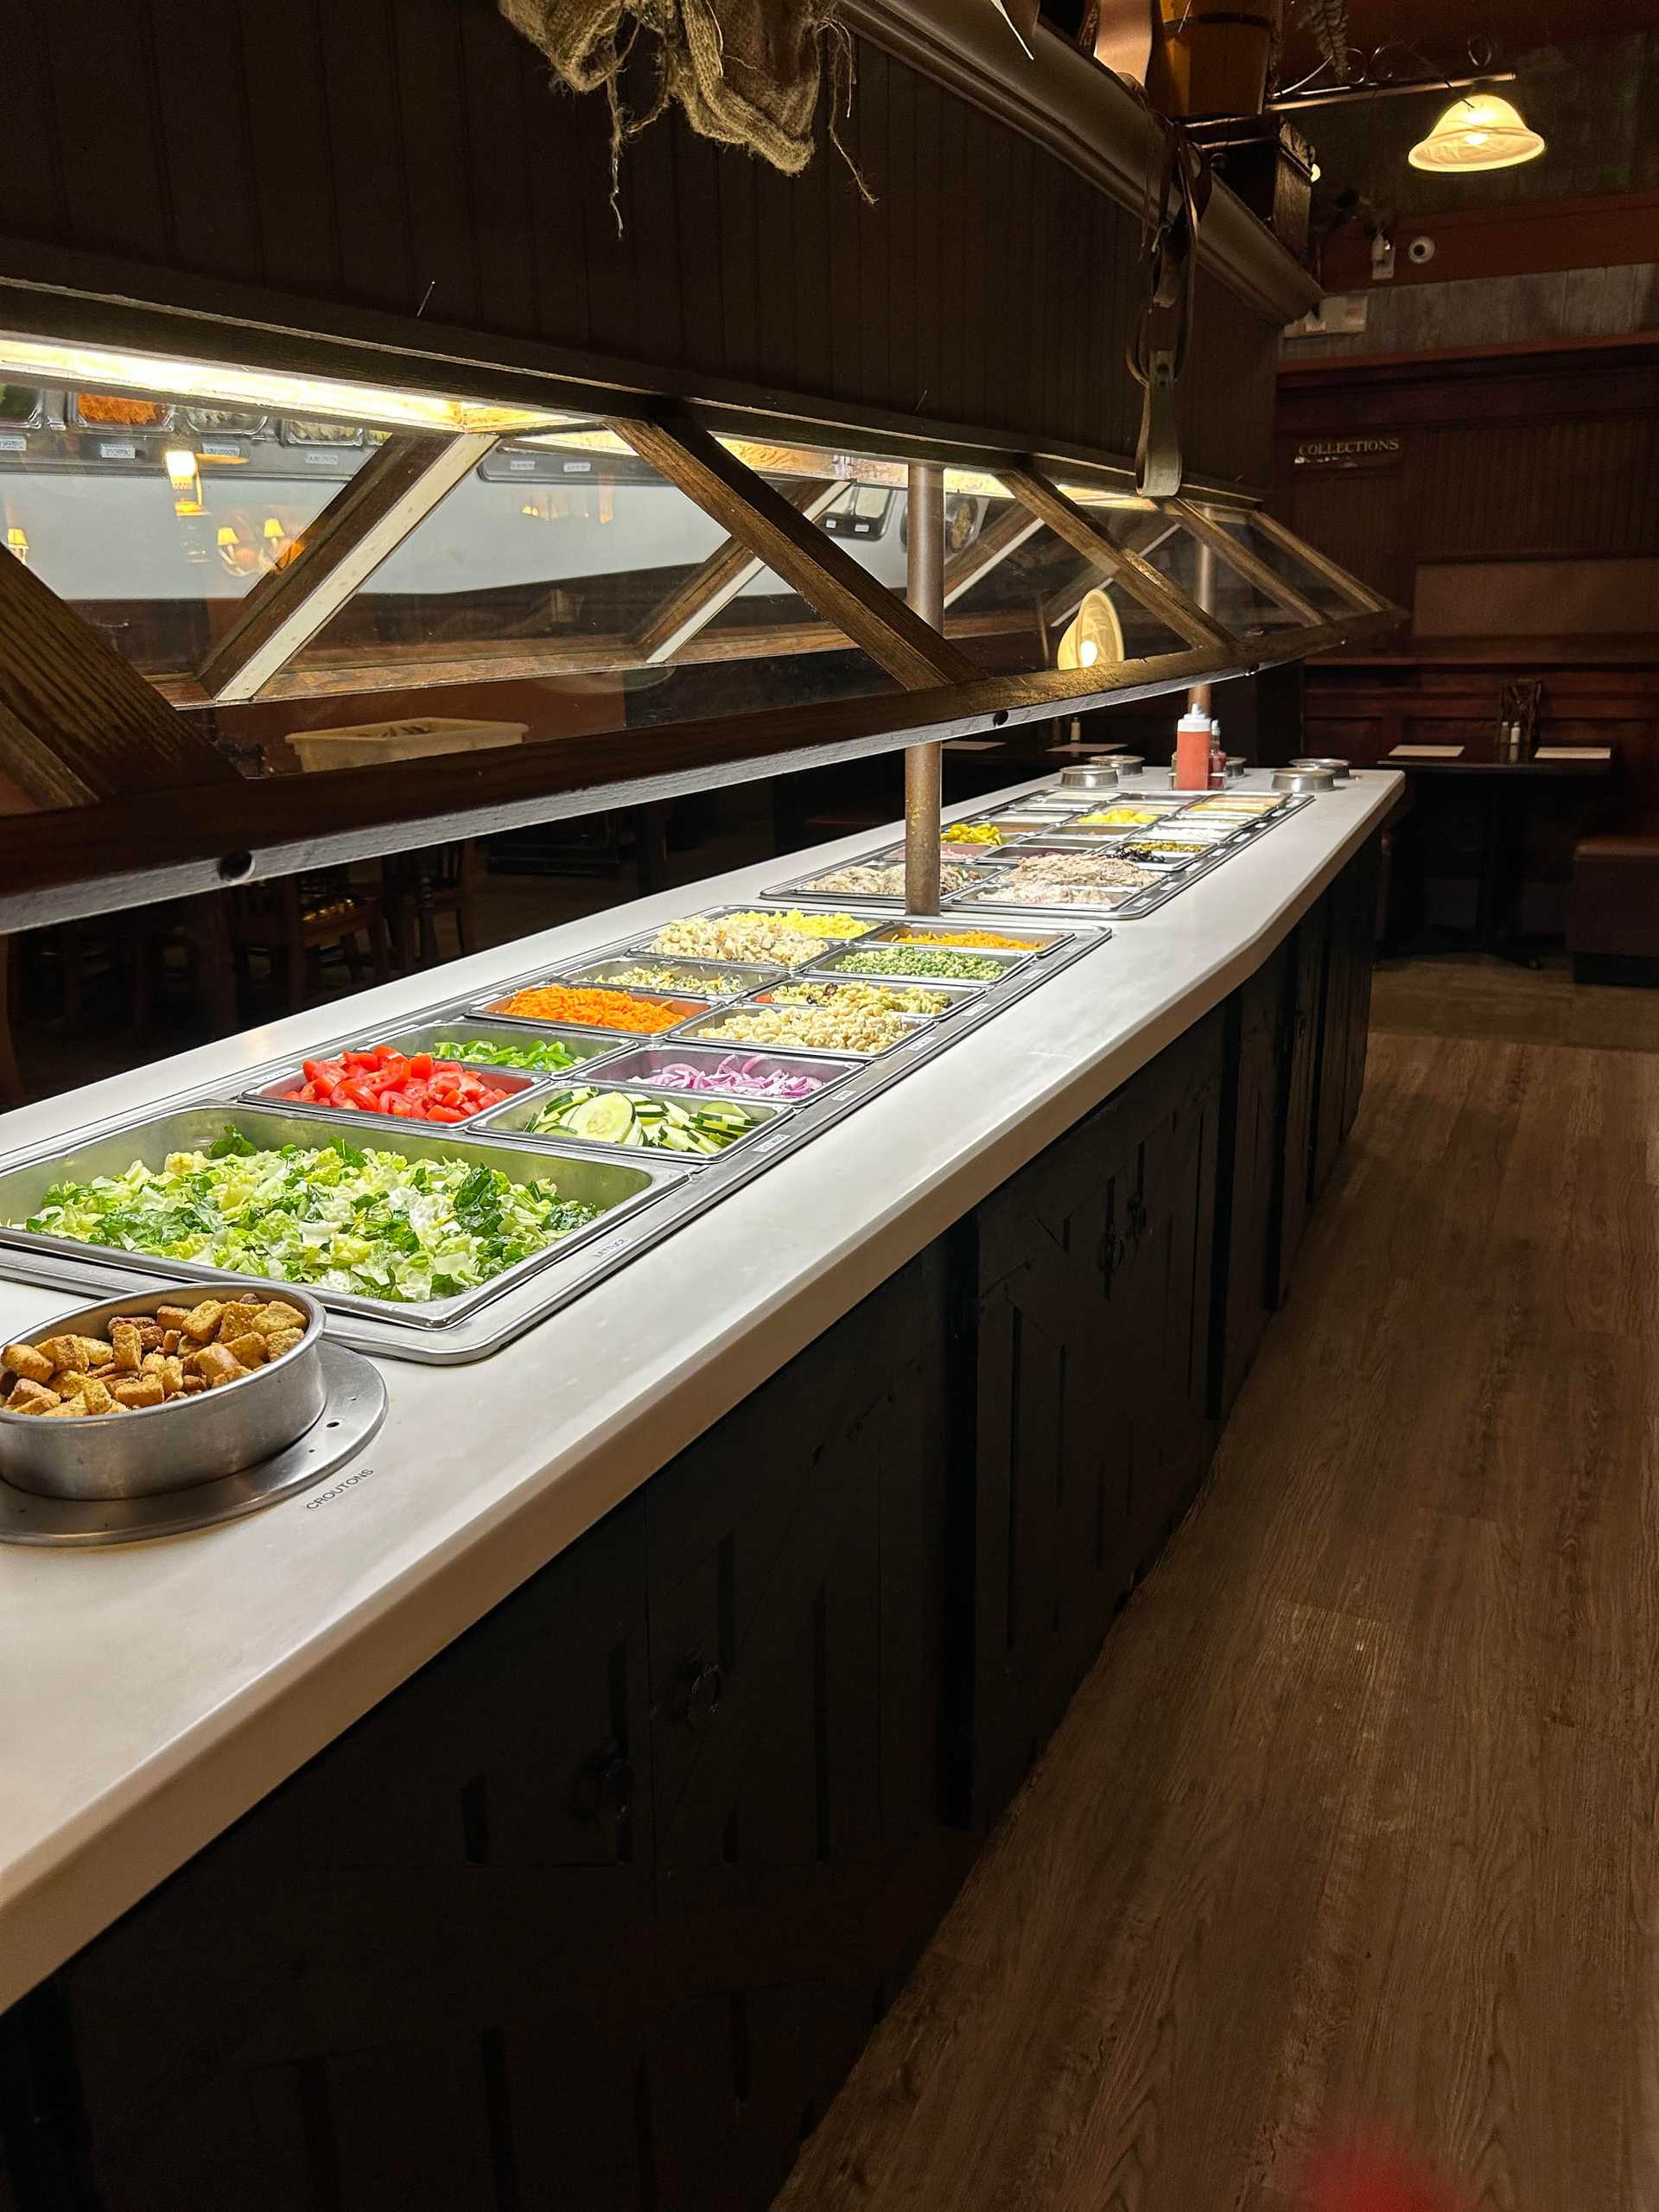 Buffet salad bar with a variety of fresh vegetables and toppings in a rustic restaurant setting.